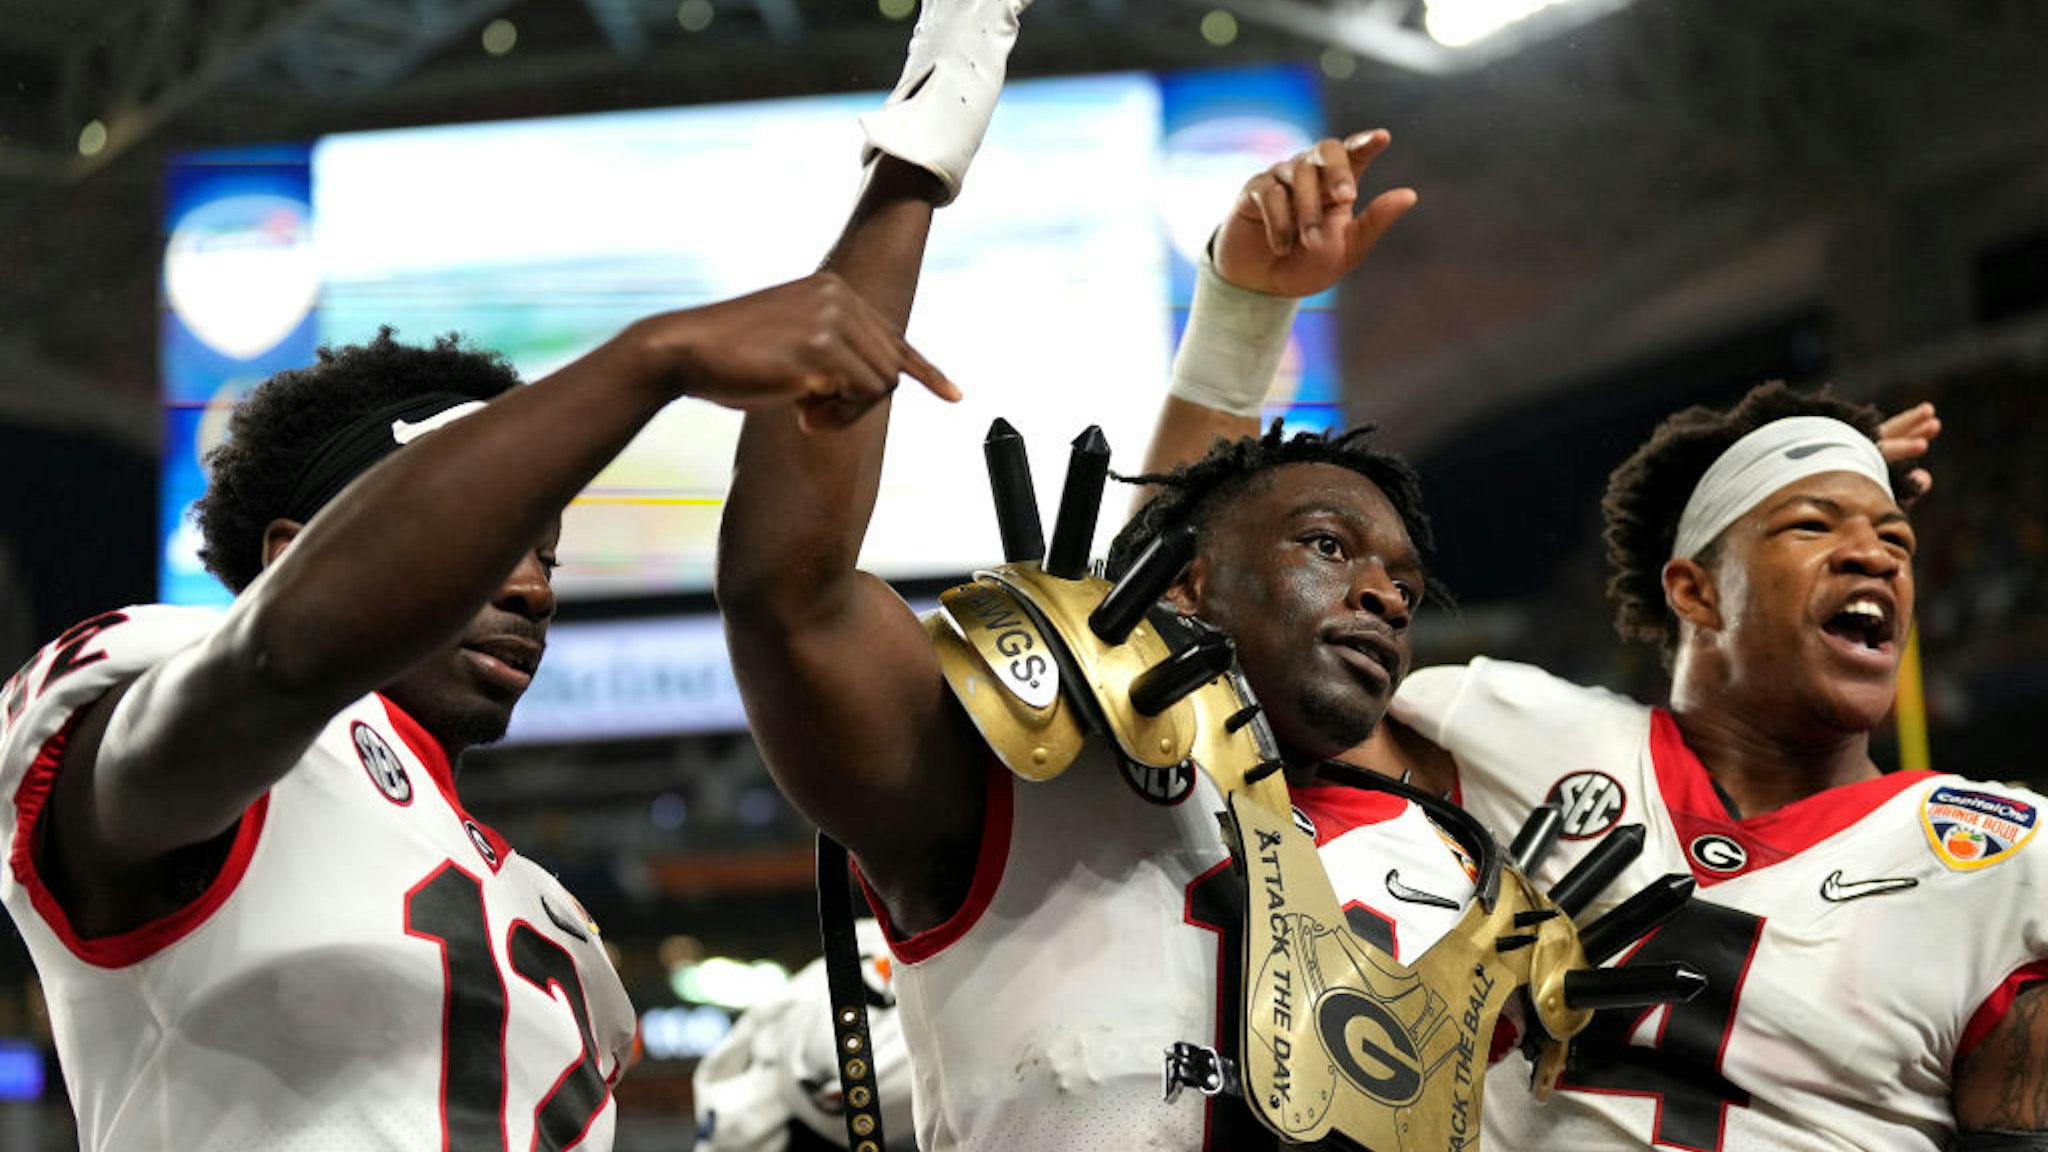 MIAMI GARDENS, FLORIDA - DECEMBER 31: Derion Kendrick #11 of the Georgia Bulldogs celebrates an interception with teammates, Nolan Smith #4 and Lovasea Carroll #12 of the Georgia Bulldogs in the third quarter of the game against the Michigan Wolverines in the Capital One Orange Bowl for the College Football Playoff semifinal game at Hard Rock Stadium on December 31, 2021 in Miami Gardens, Florida. (Photo by Mark Brown/Getty Images)